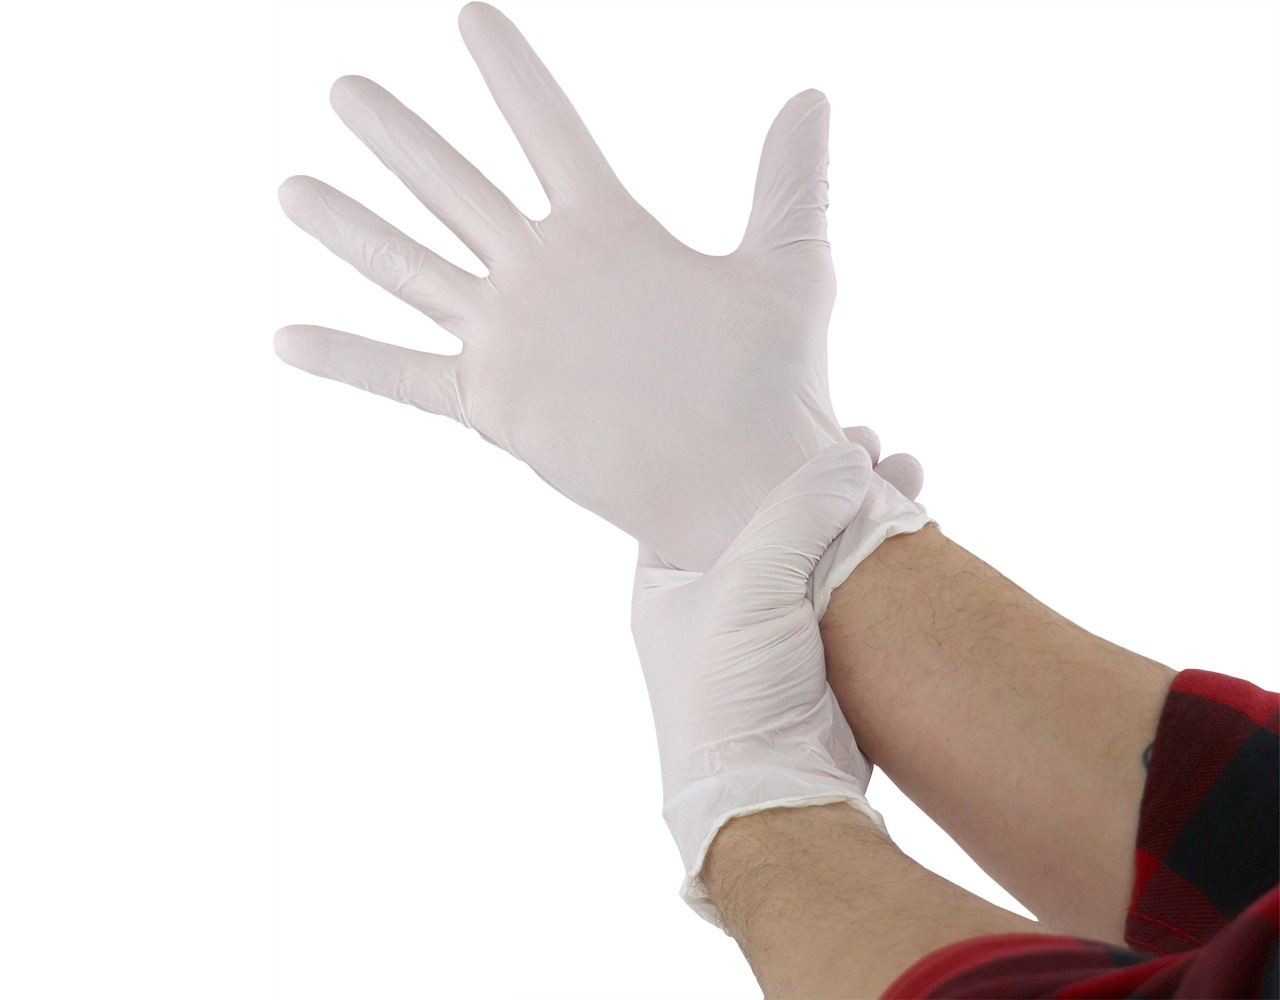 Picture for Mad Farmer White Nitrile Horticulture Gloves, Size S, Box of 100